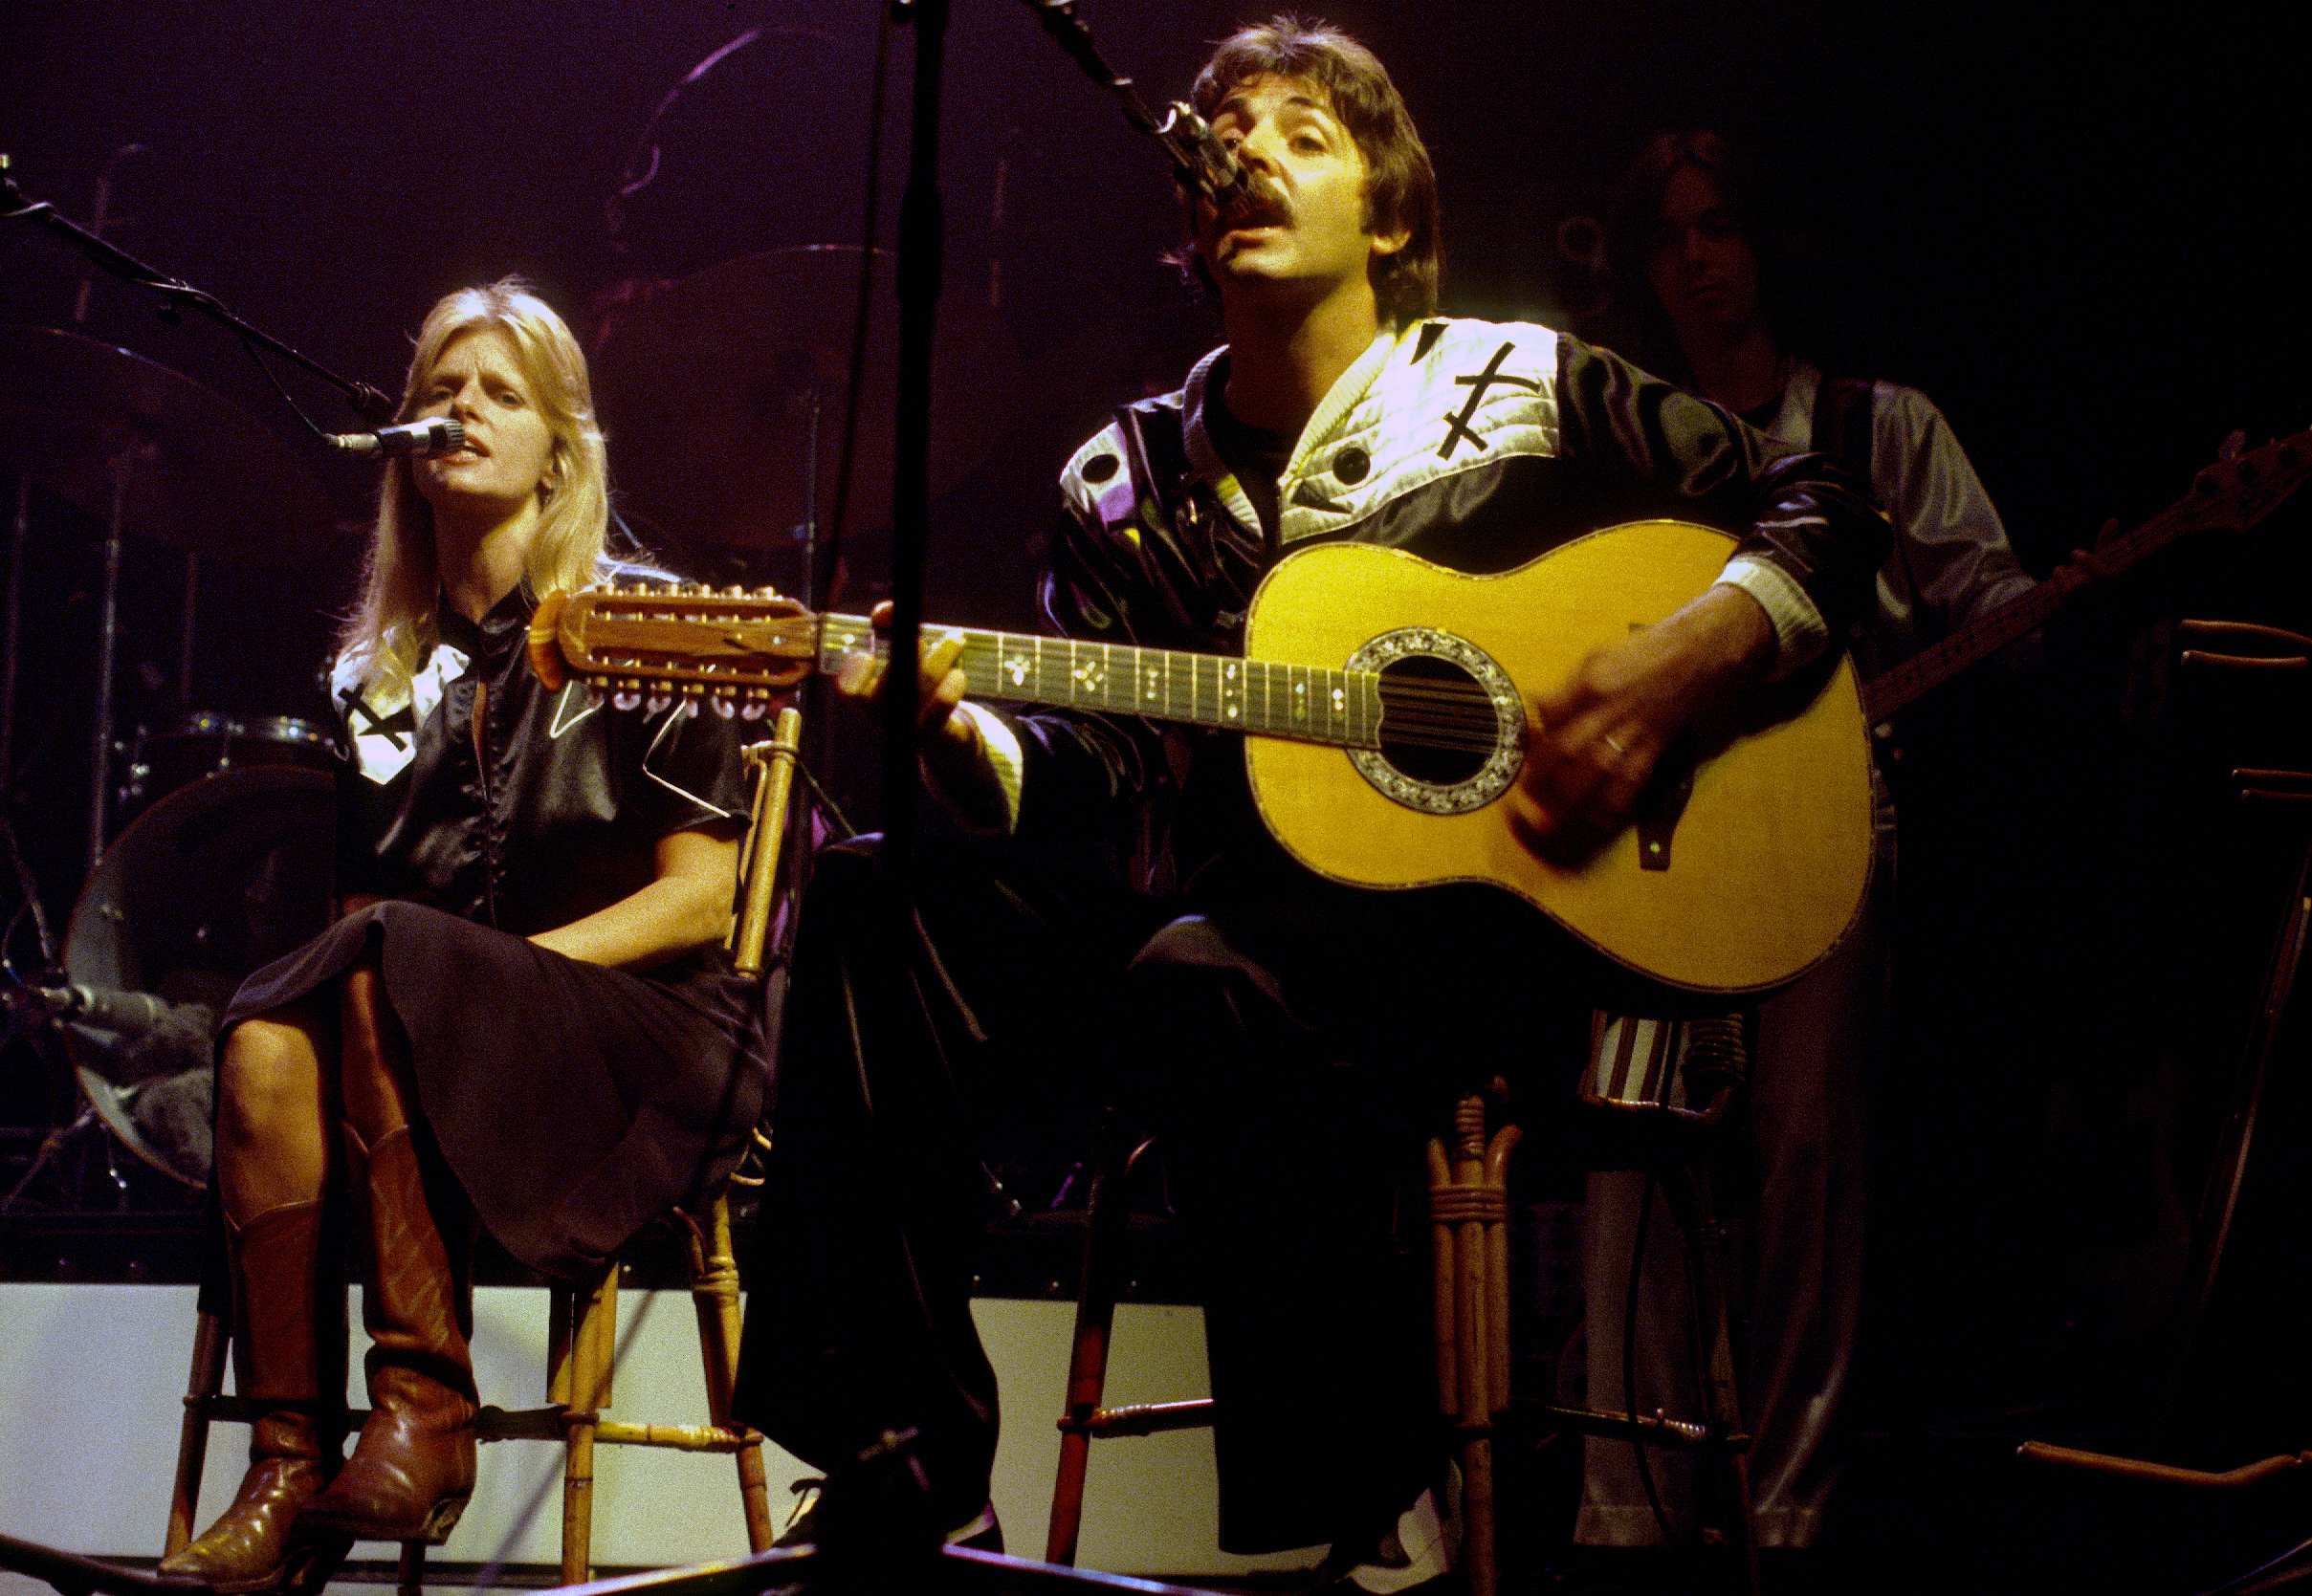 Paul McCartney with his wife Linda Eastman perform on stage on October 01, 1976 in London, England | Source: Getty Images